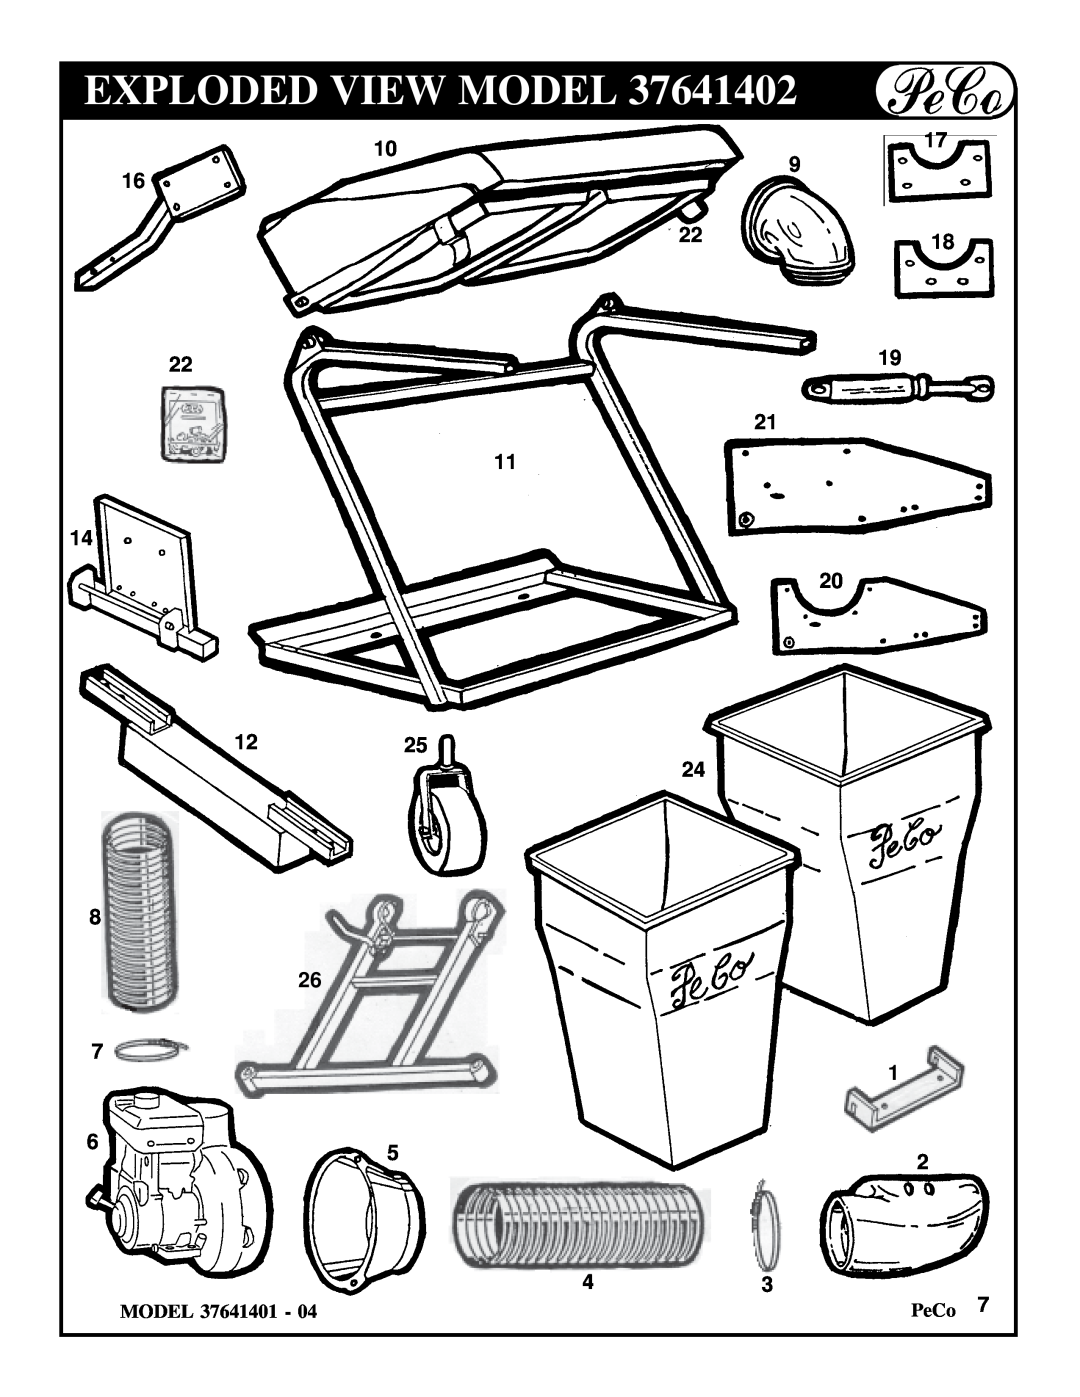 Briggs & Stratton owner manual Exploded View Model, MODEL 37641401, PeCo 